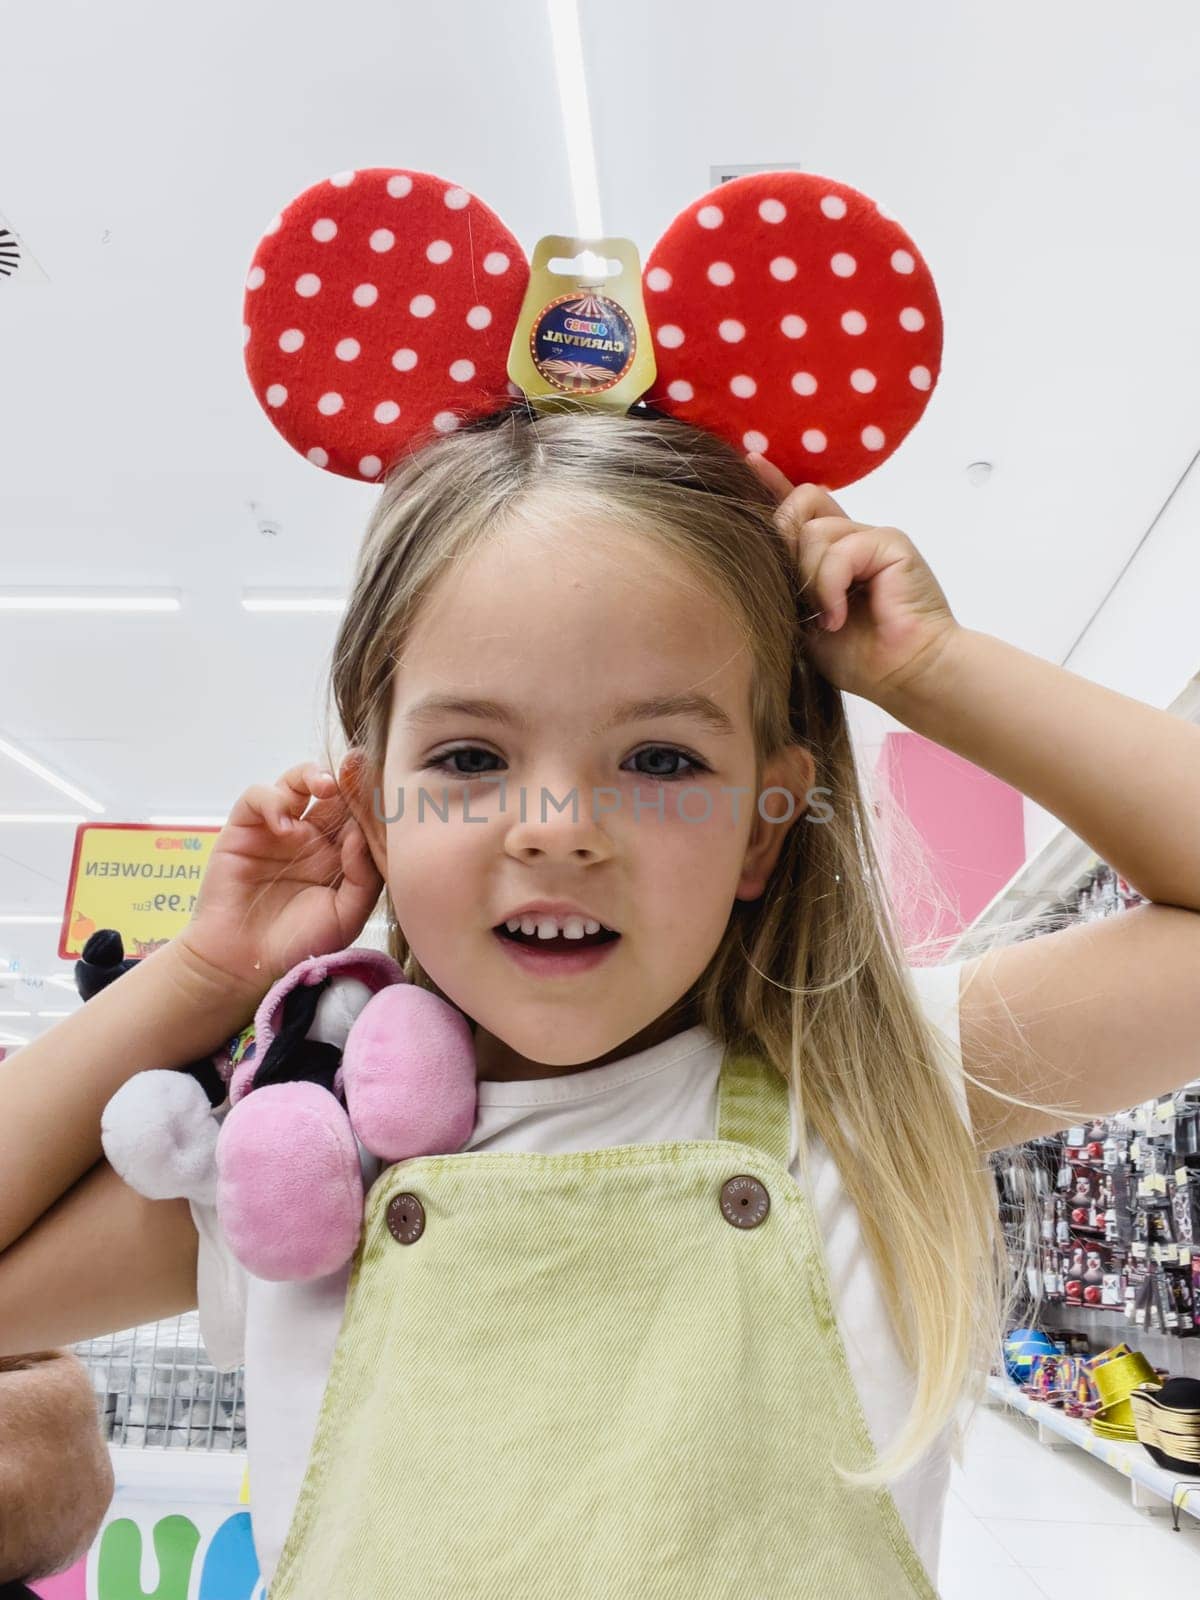 Little girl in the store trying on cute red polka dot Minnie Mouse ears. High quality photo